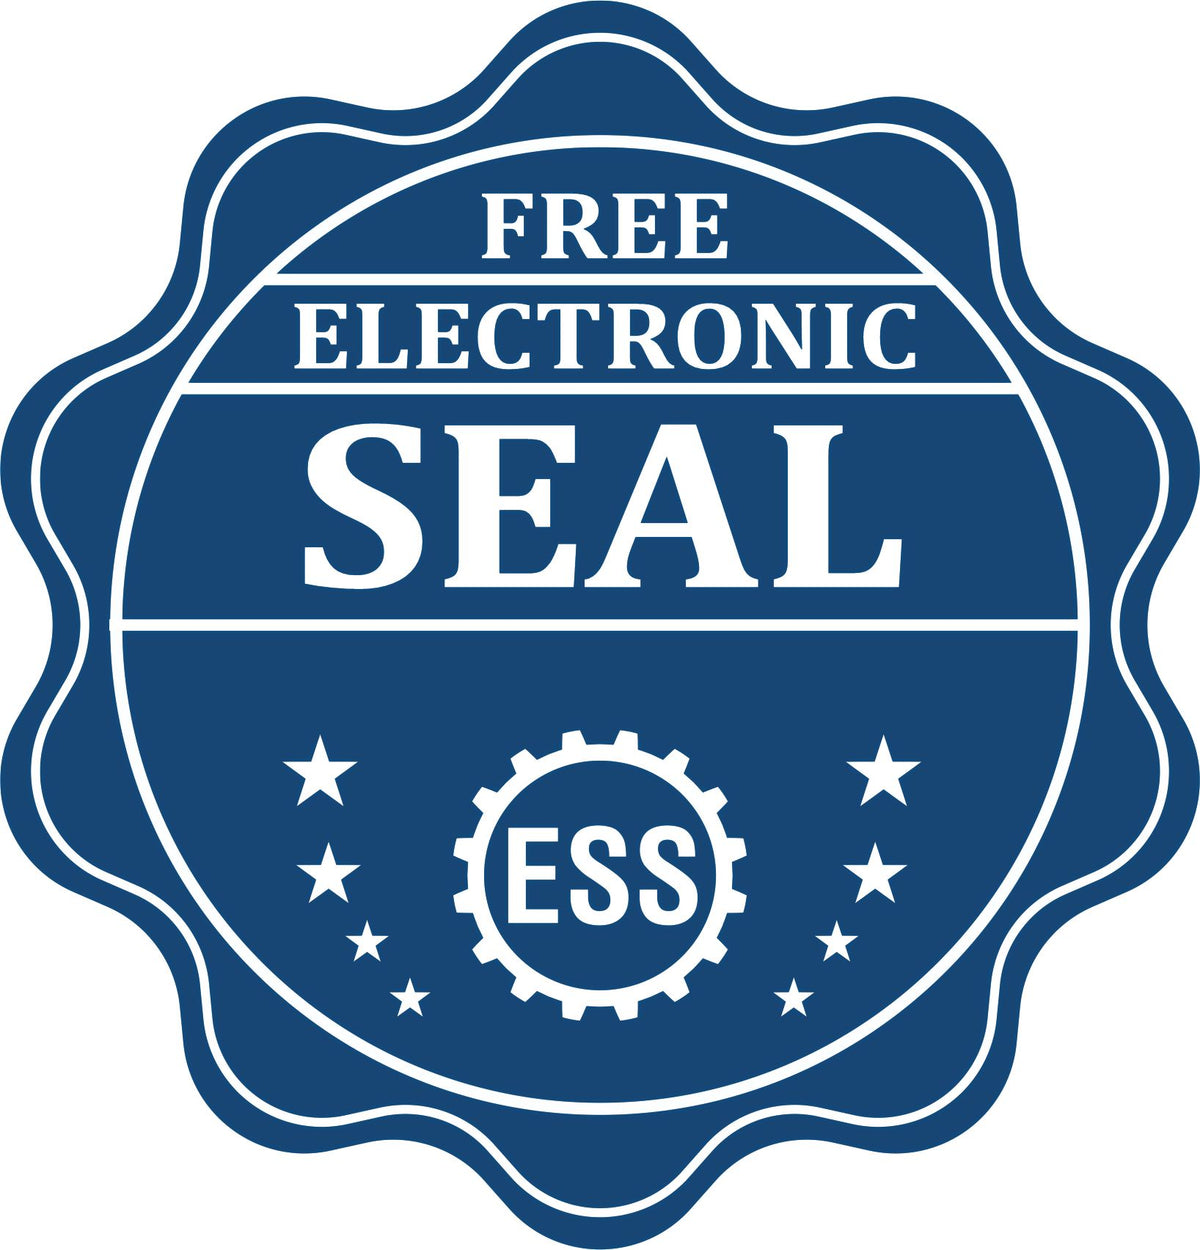 A badge showing a free electronic seal for the State of Minnesota Long Reach Architectural Embossing Seal with stars and the ESS gear on the emblem.